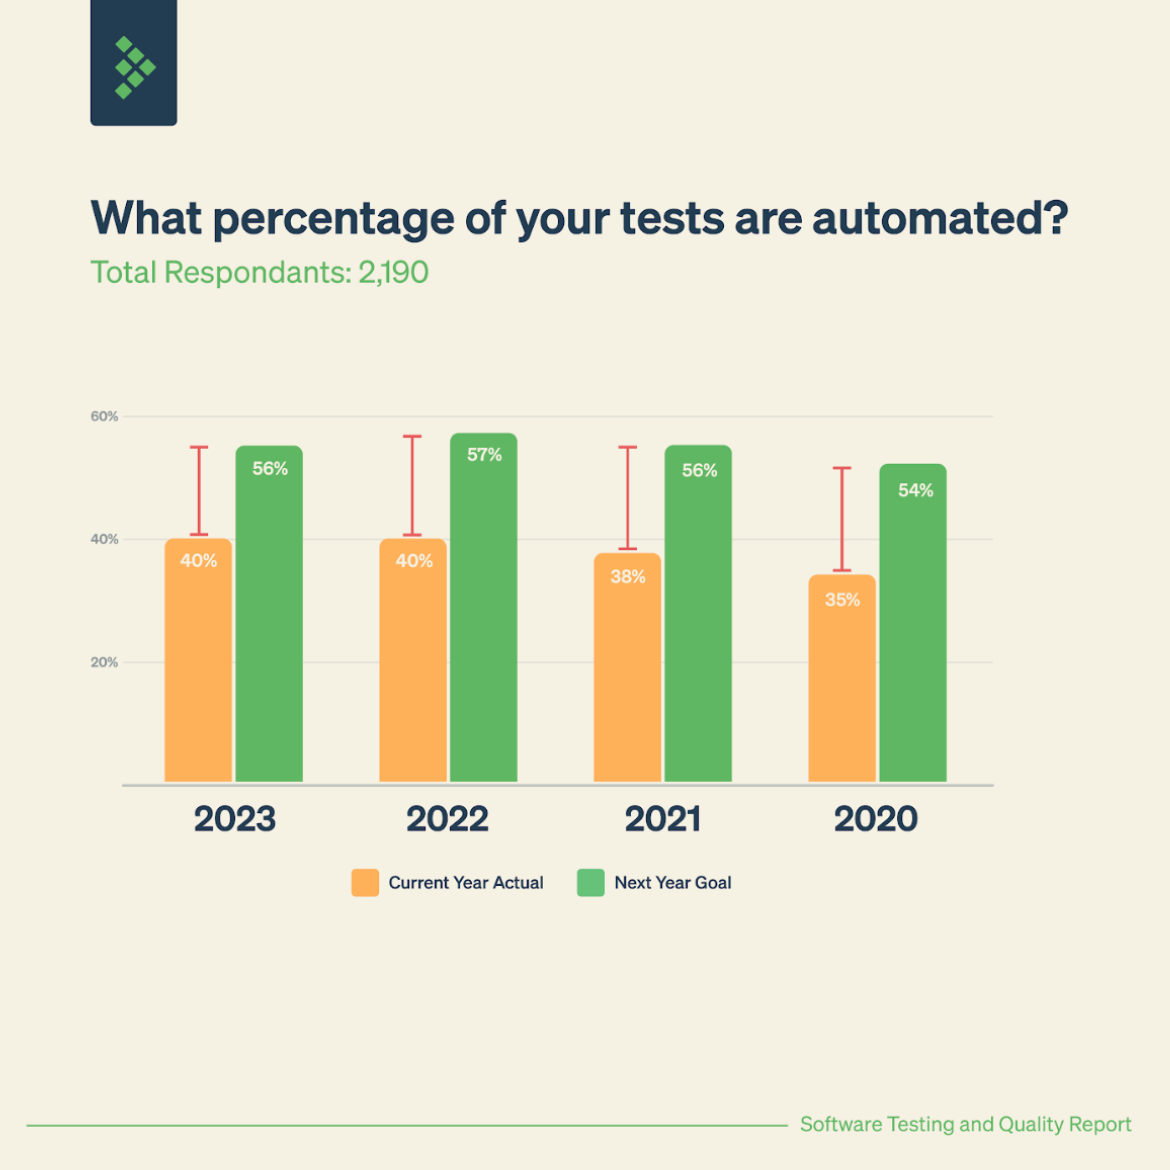 What percentage of your tests are automated?